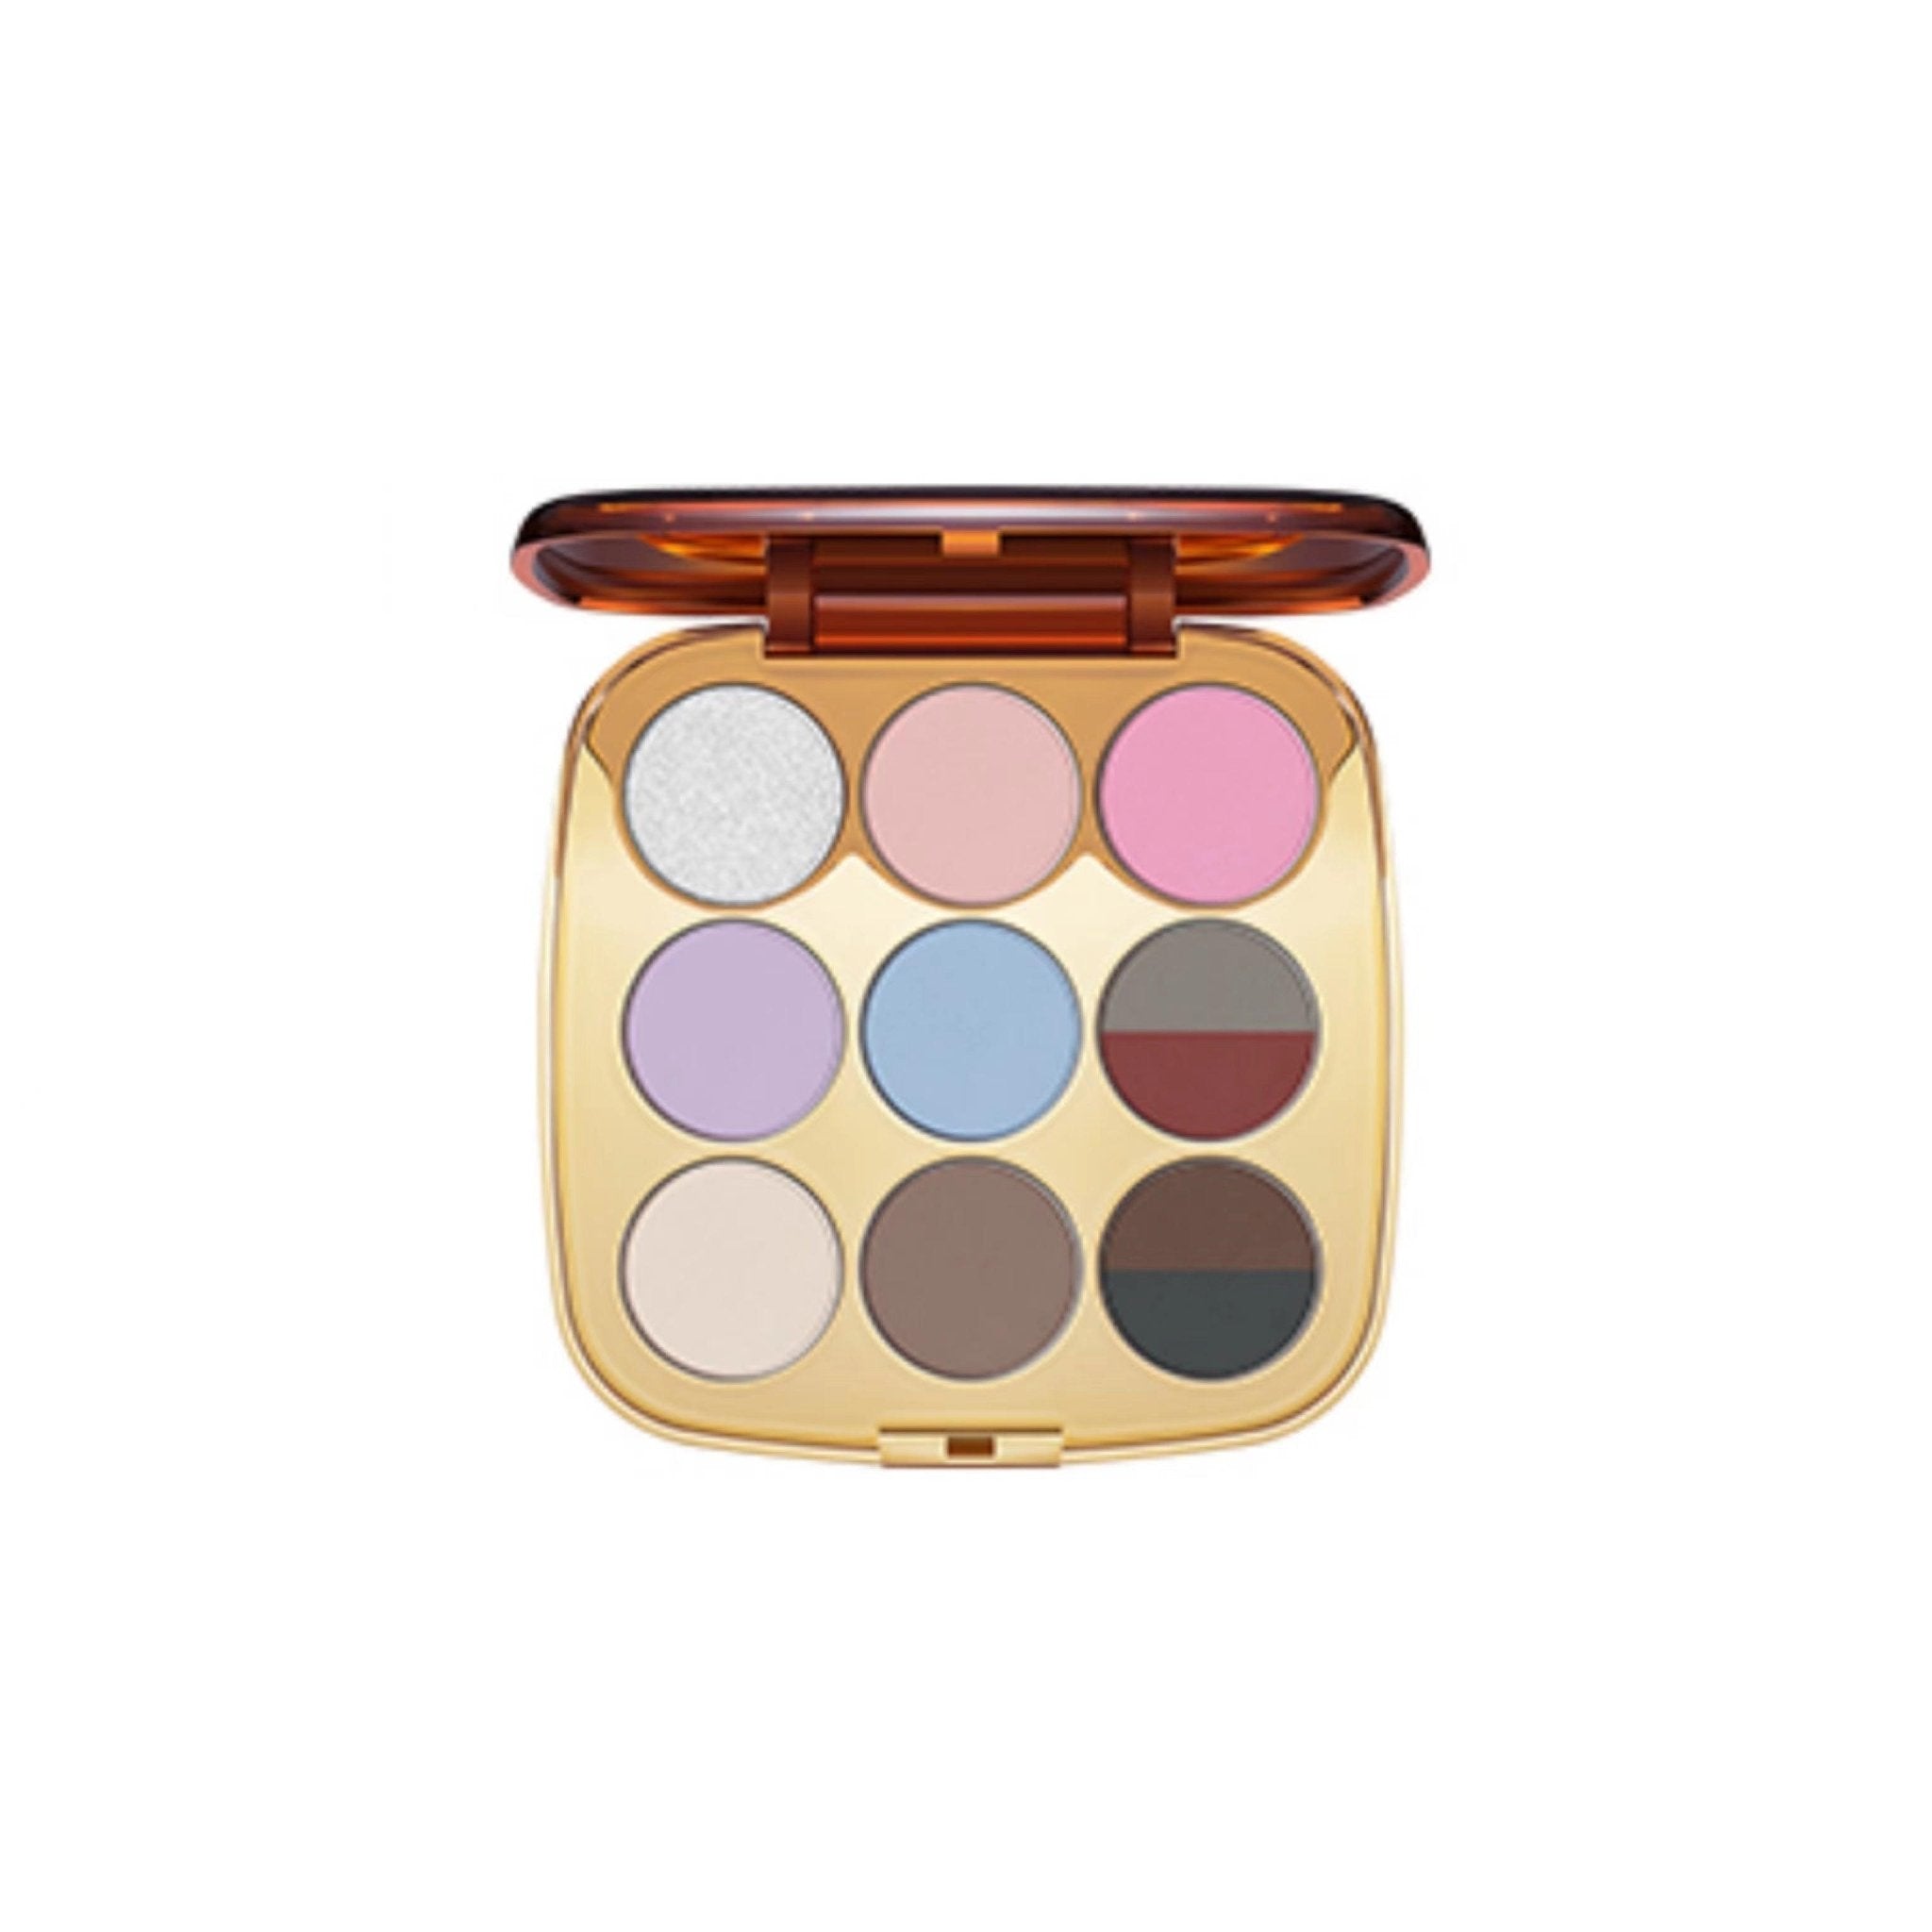 OUTOFOFFICE 9 Colors Eyeshadow Dream Palette OOO015 - Chic Decent